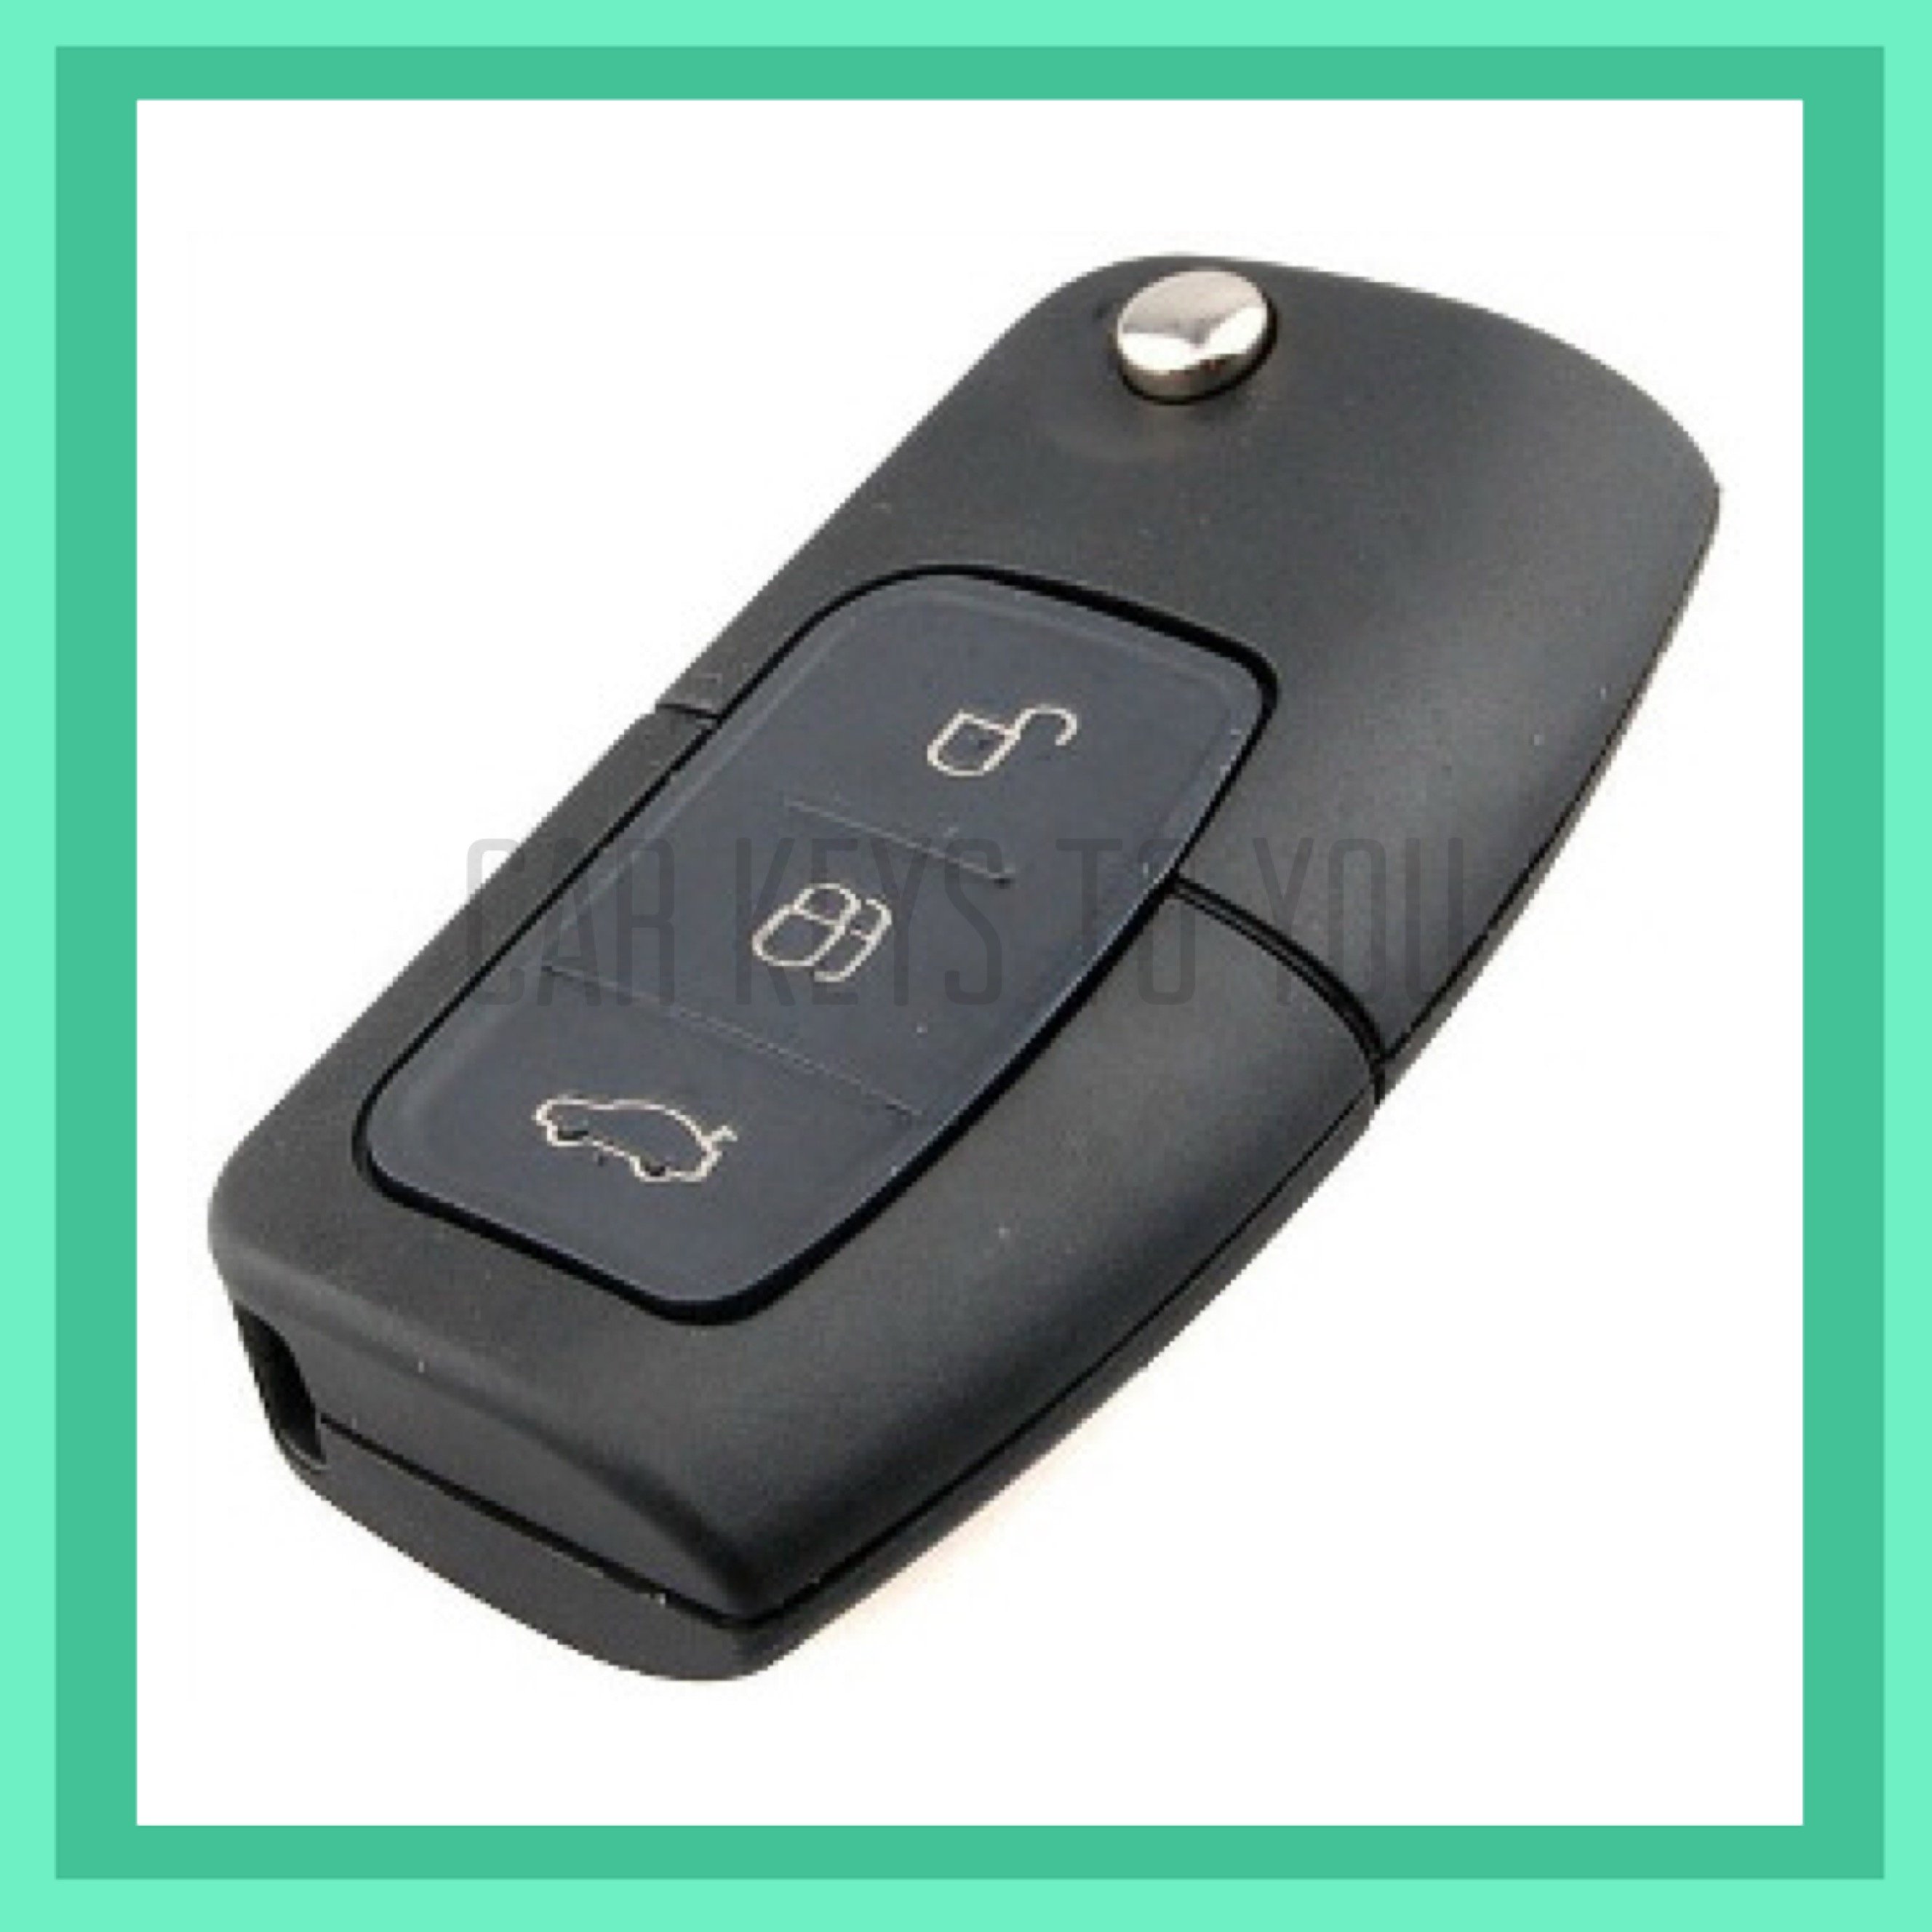 Ford Territory Car Key and Remote, Suit SY 2005-2011